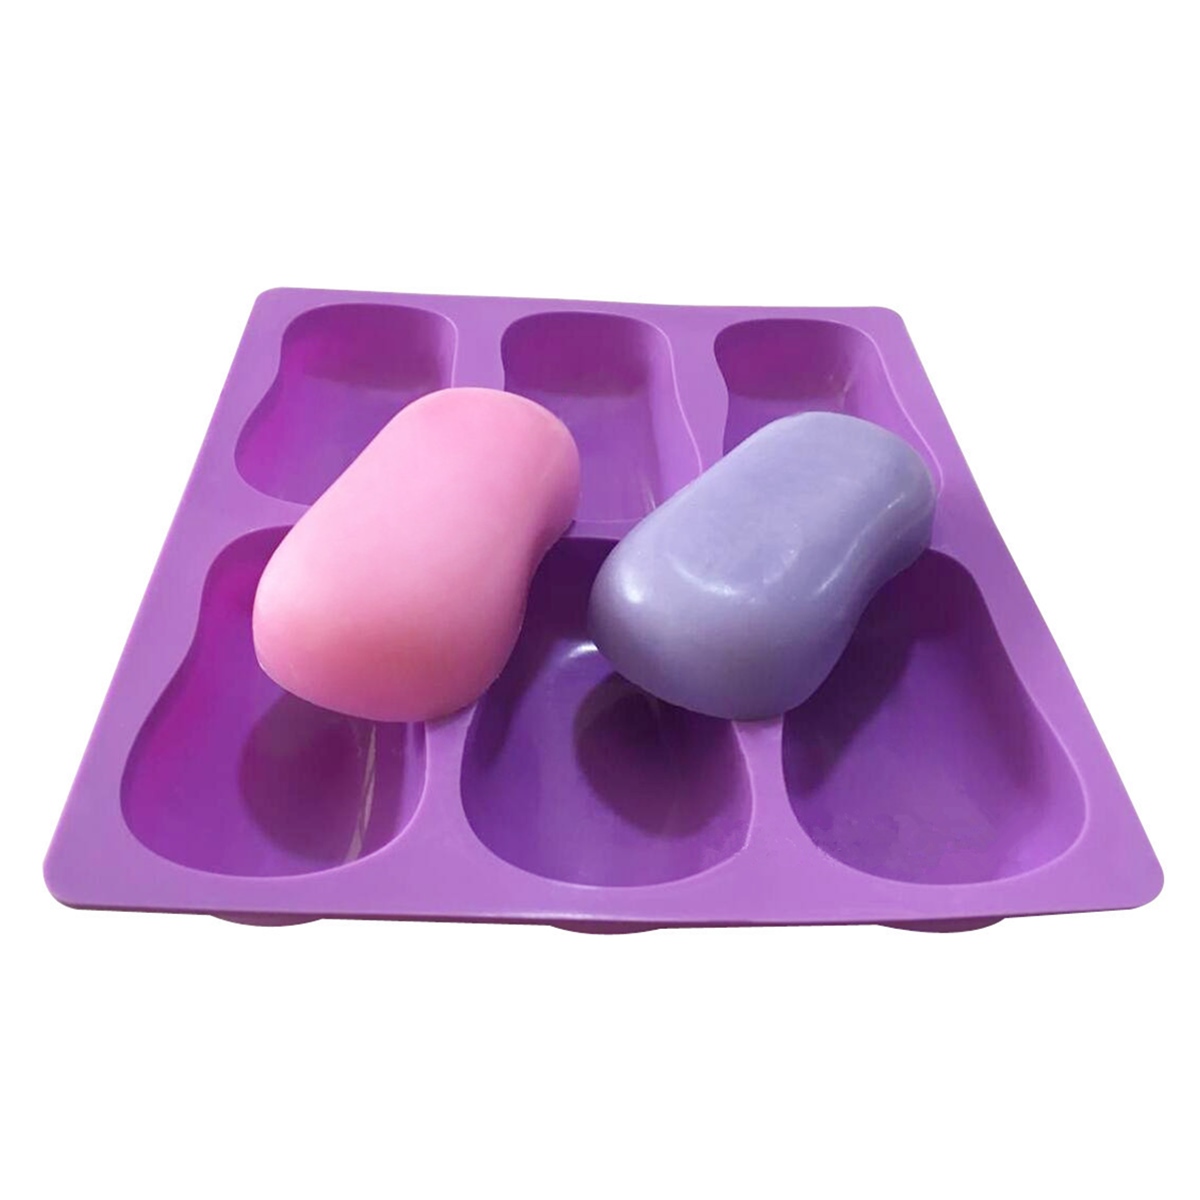 

DIY 6 Slots Cake Mold Tool 3D Oval Silicone Soap Mould Baking Mold Handmade Chocolate Pudding Jelly Candy Cookie Maker